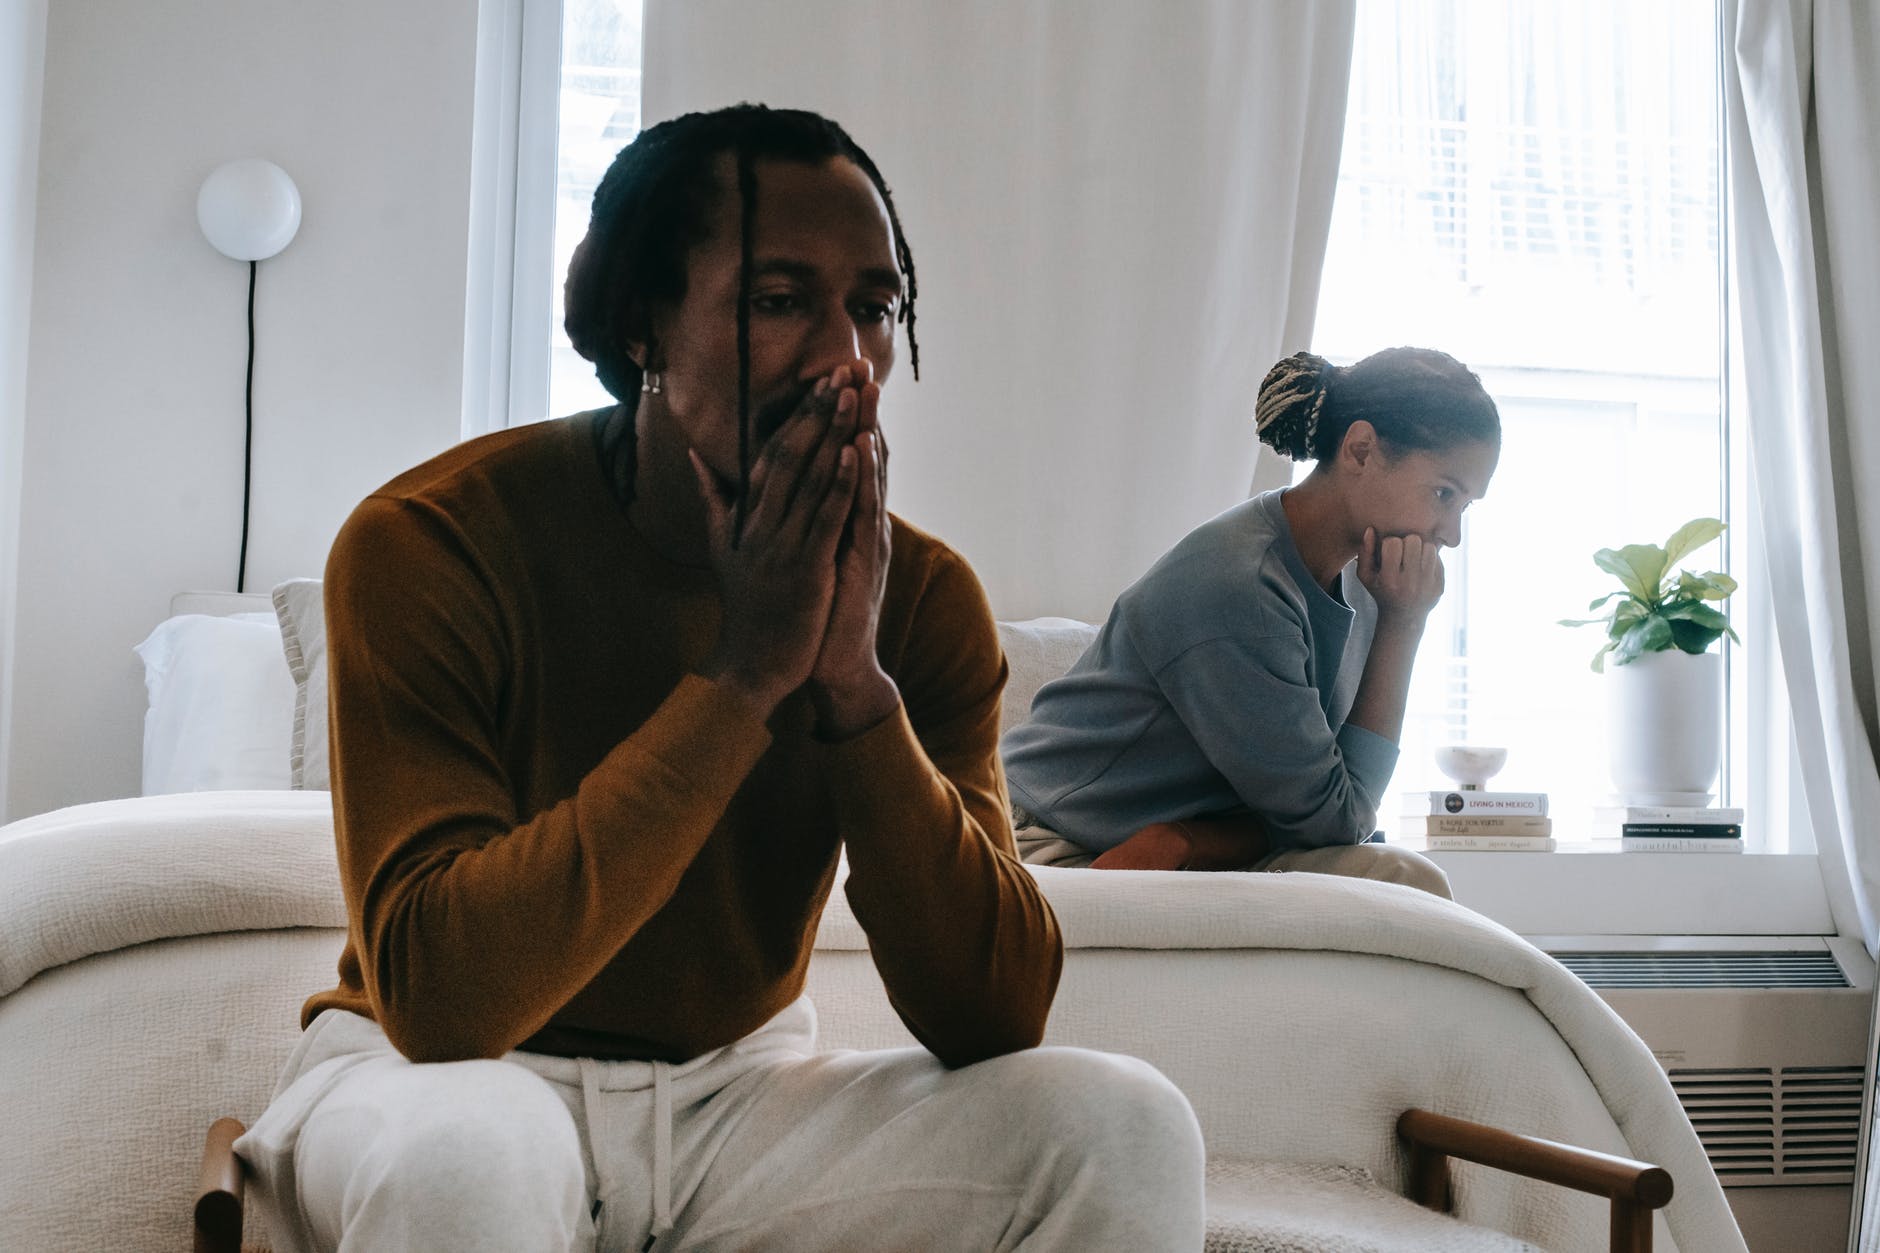 A couple not speaking to each other | Source: Pexels